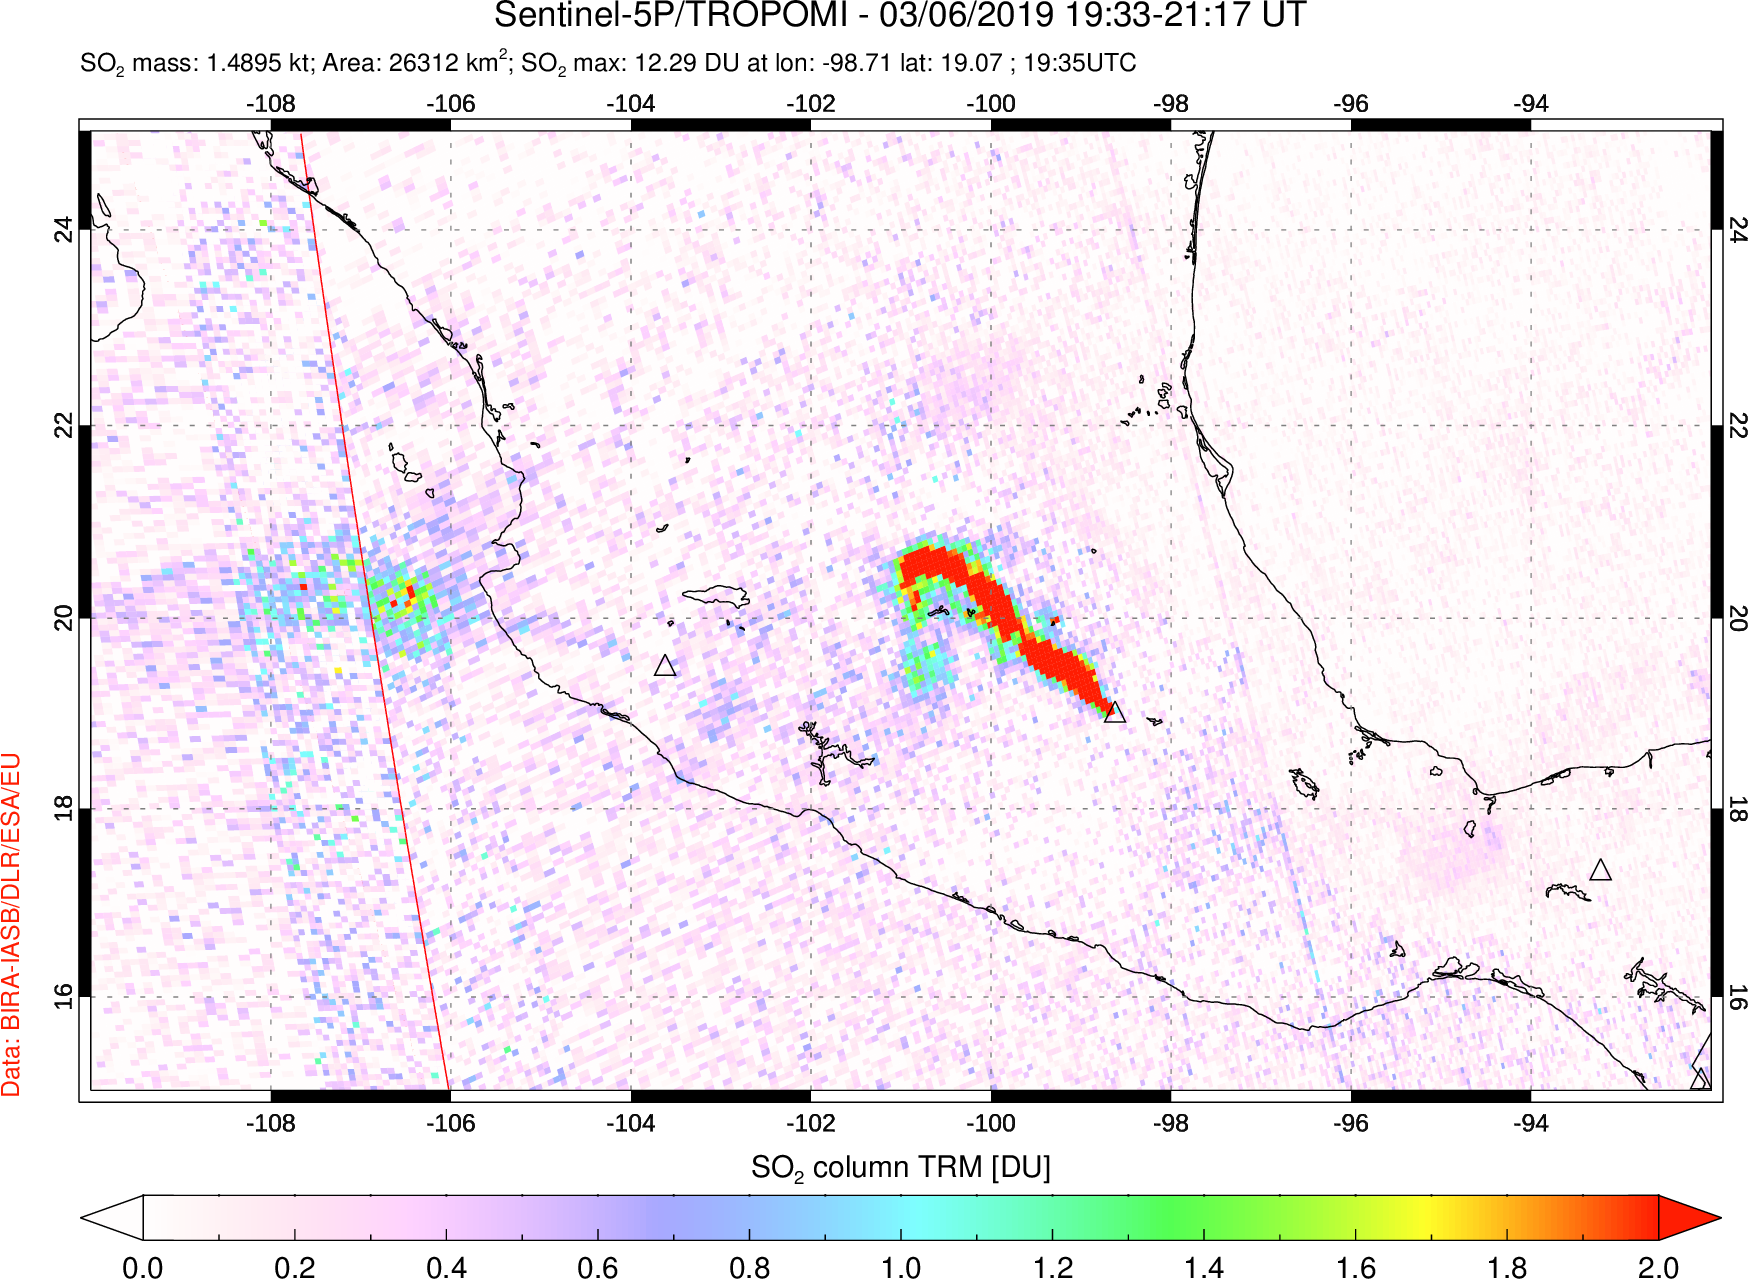 A sulfur dioxide image over Mexico on Mar 06, 2019.